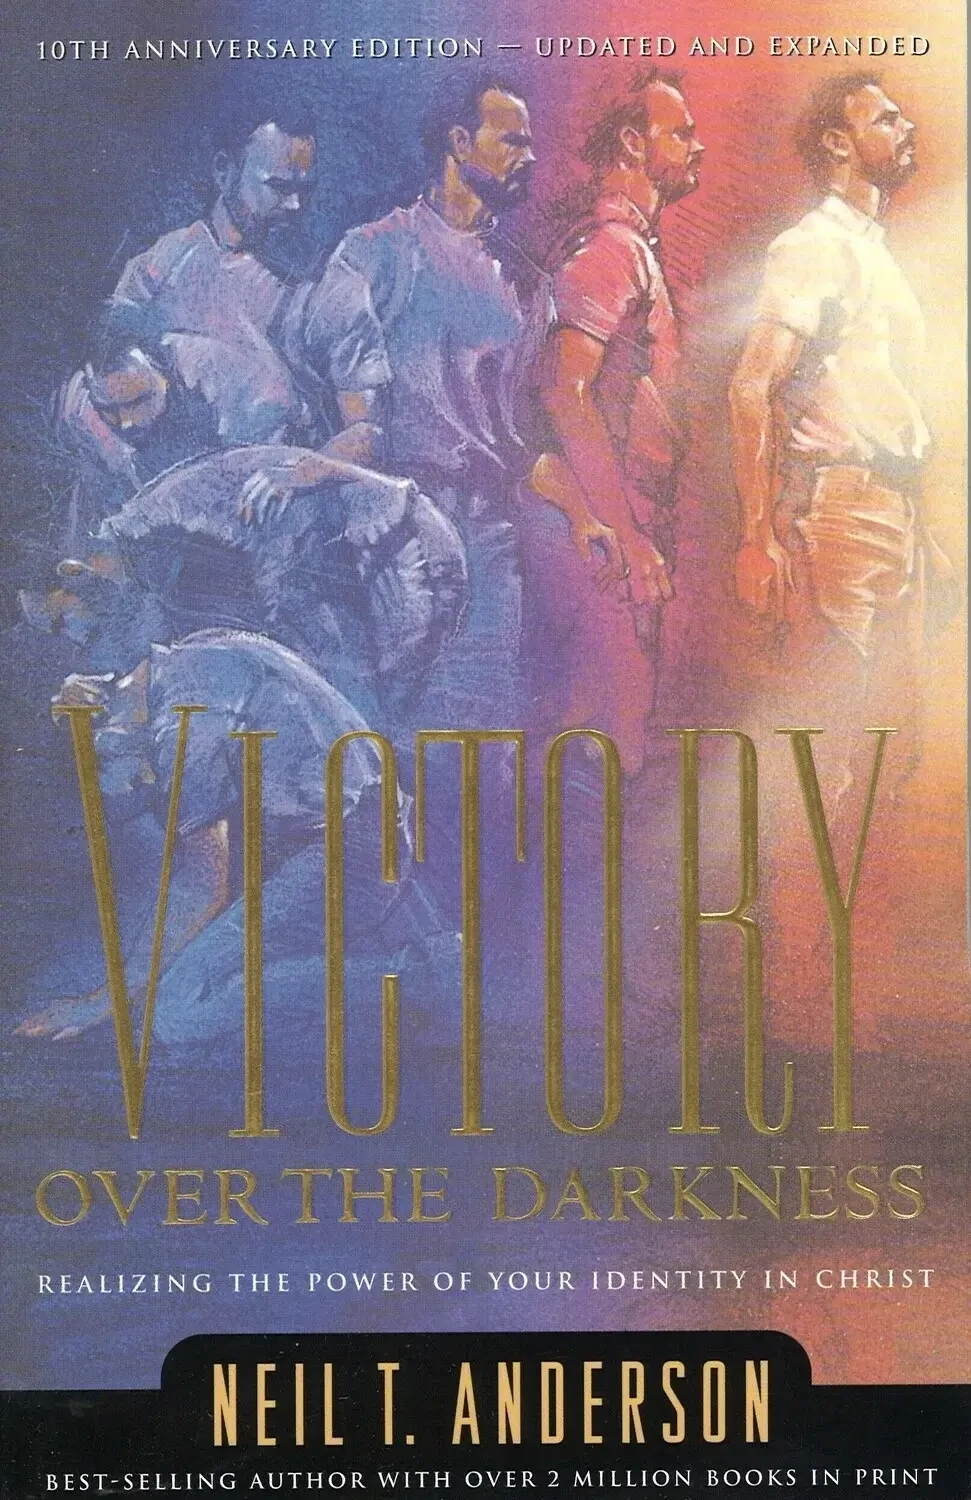 Victory Over the Darkness, Neil T. Anderson